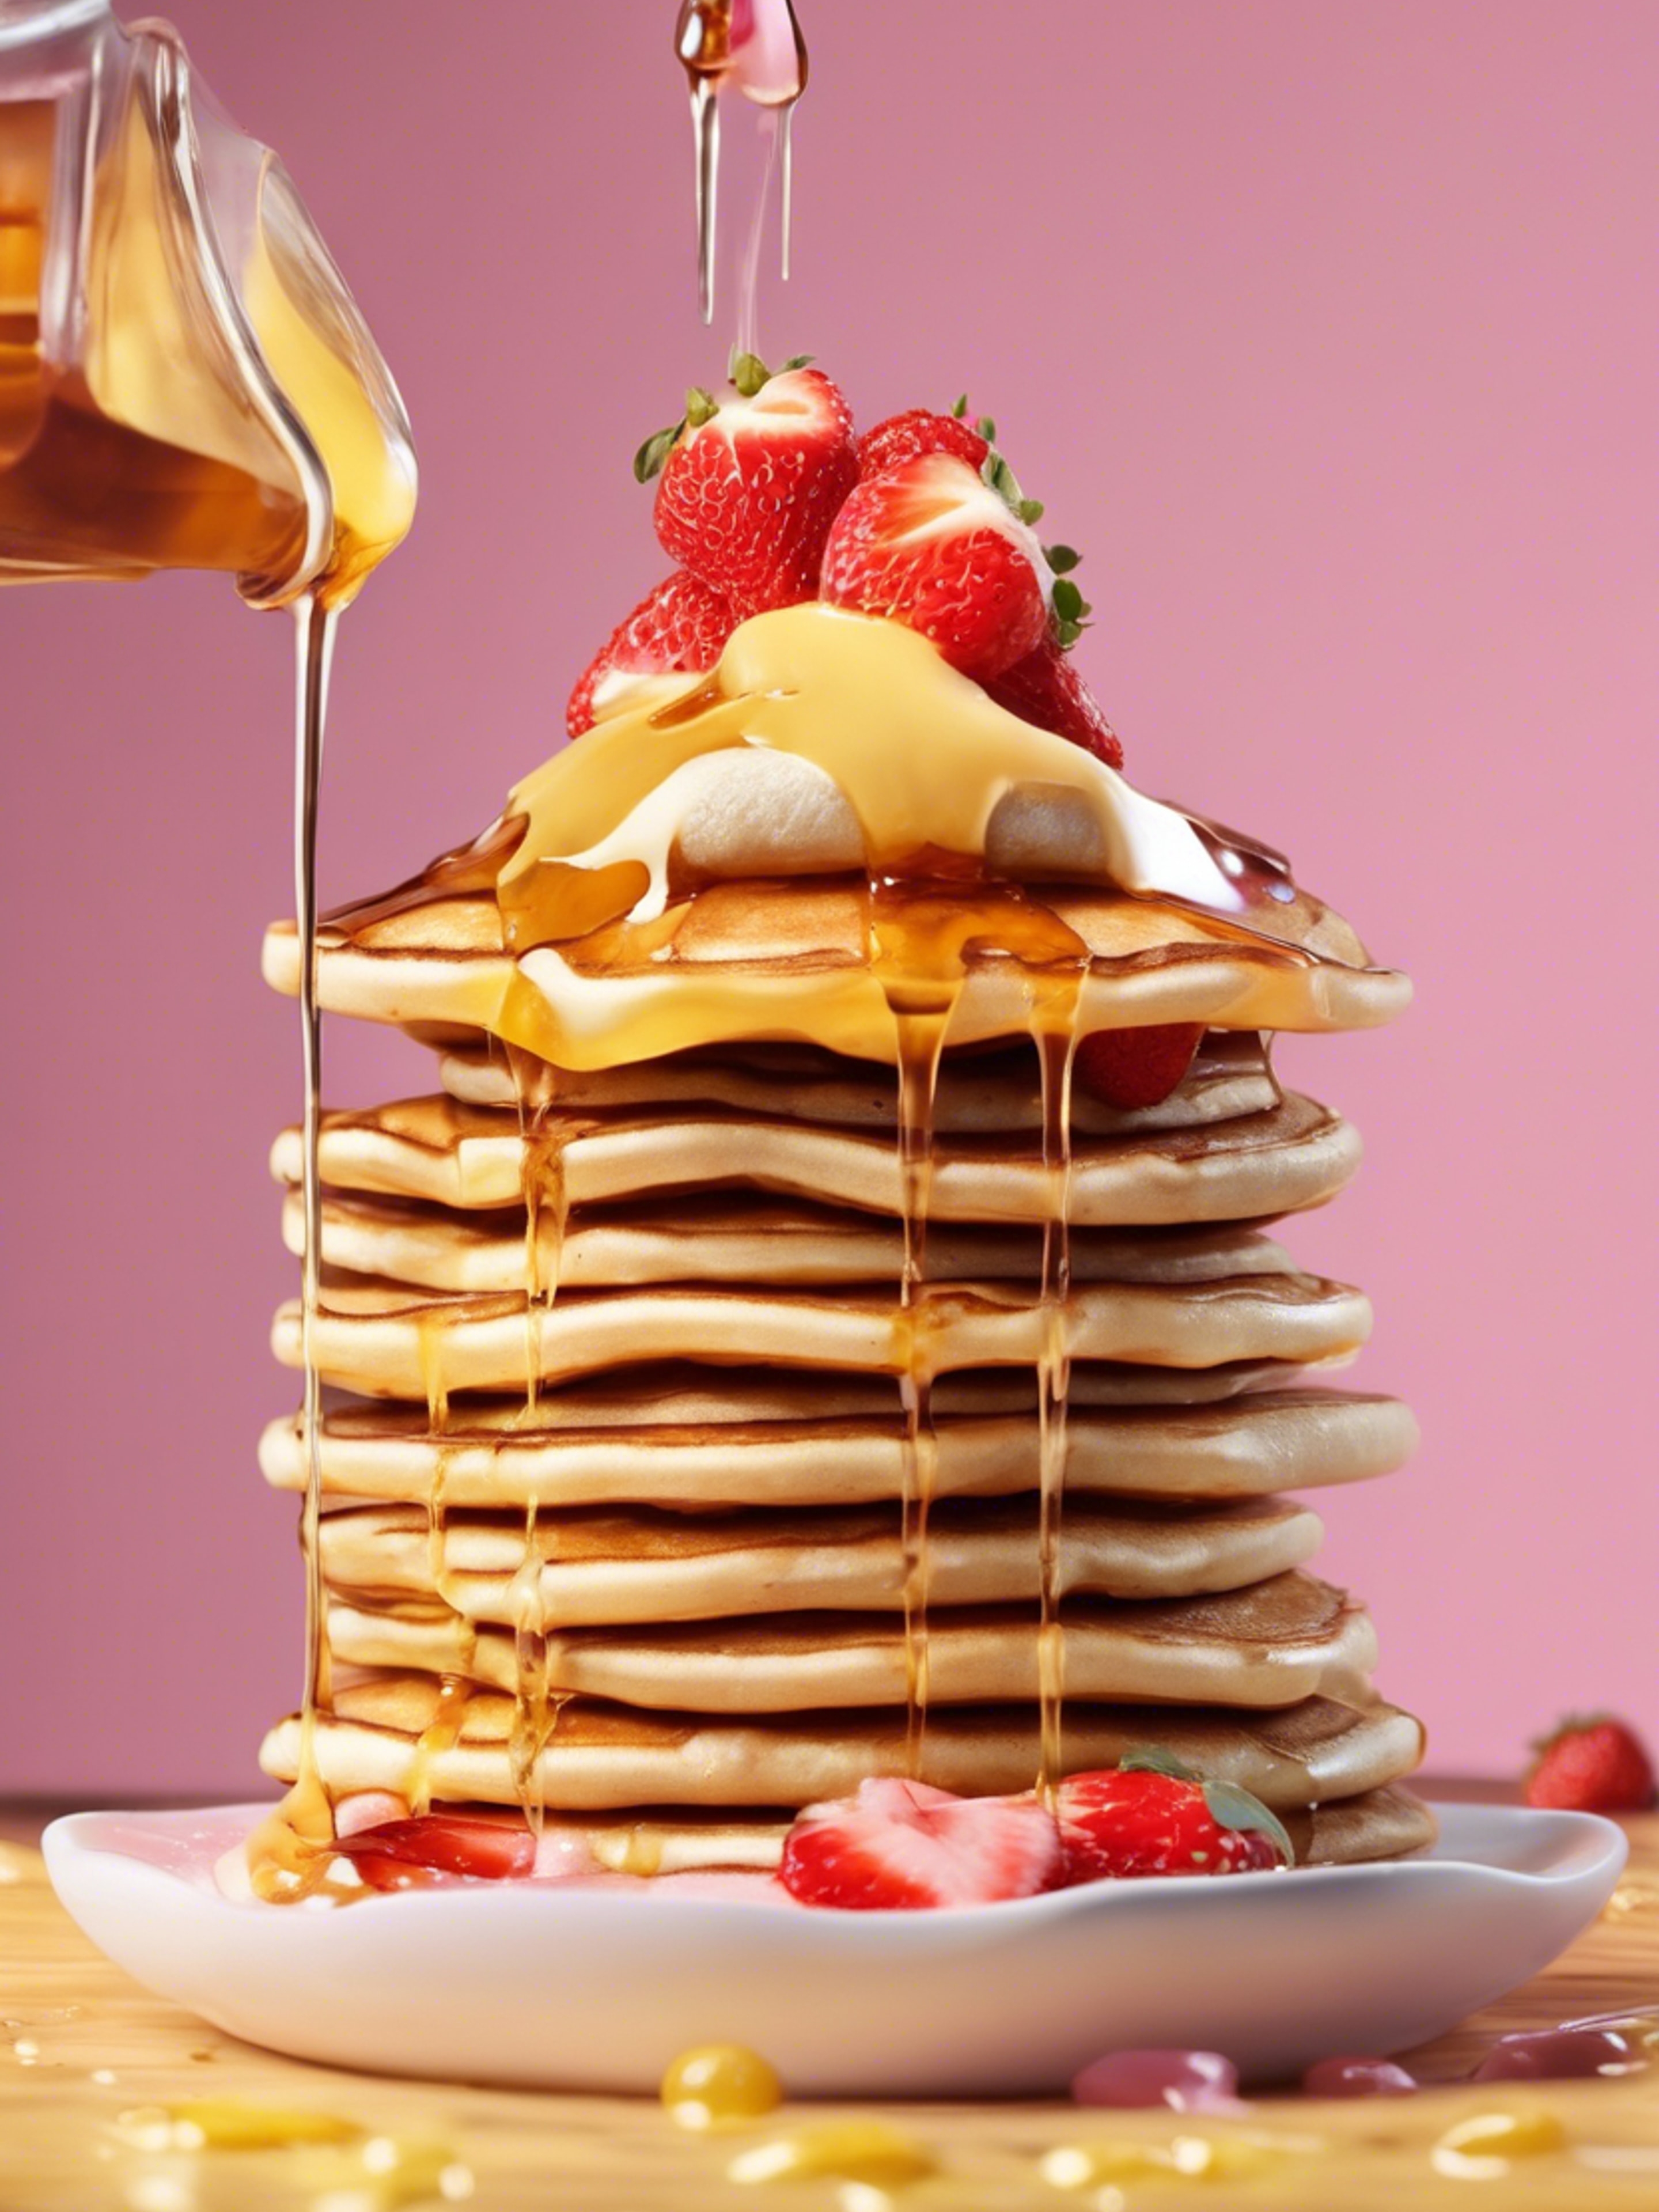 Beige kawaii pancakes stacked with a melted butter and syrup, topped with mini strawberry slices. Wallpaper[6cf29e03a904430684e0]